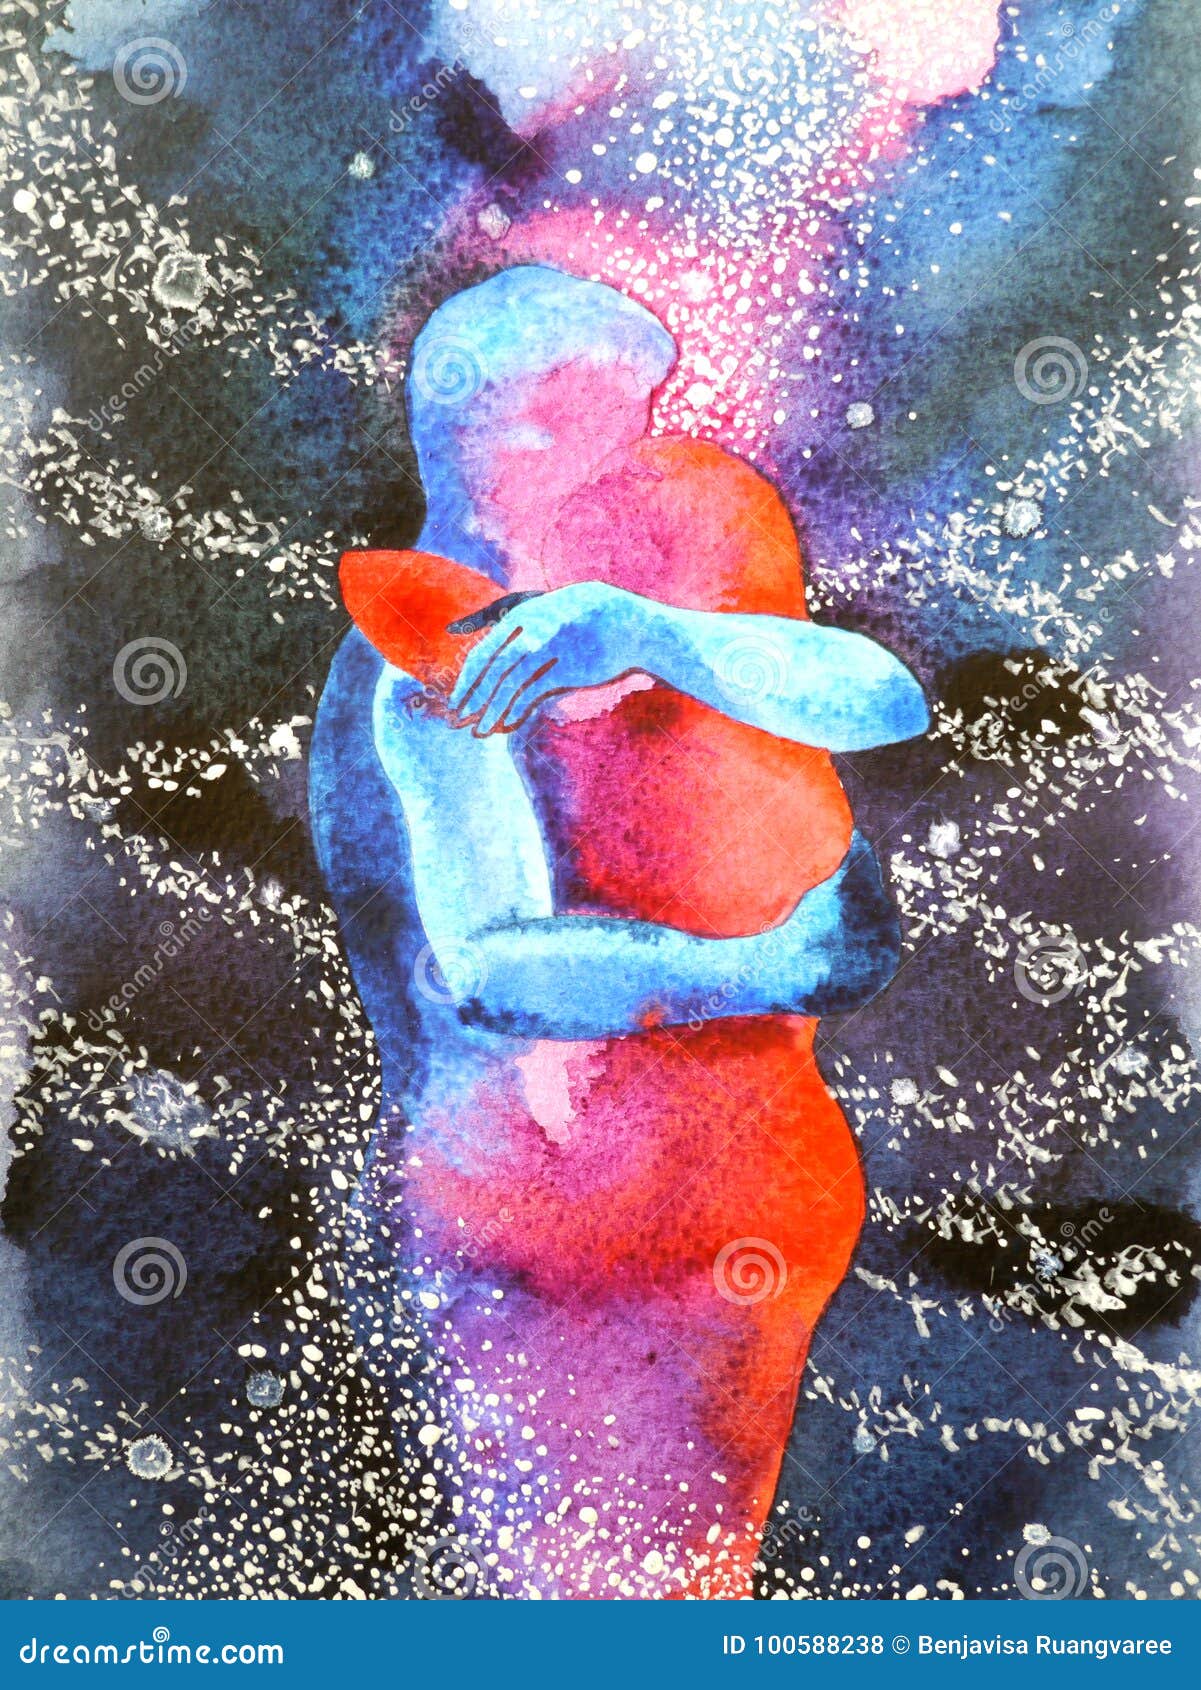 couple lover hugging in universe abstract free mind, inside your world